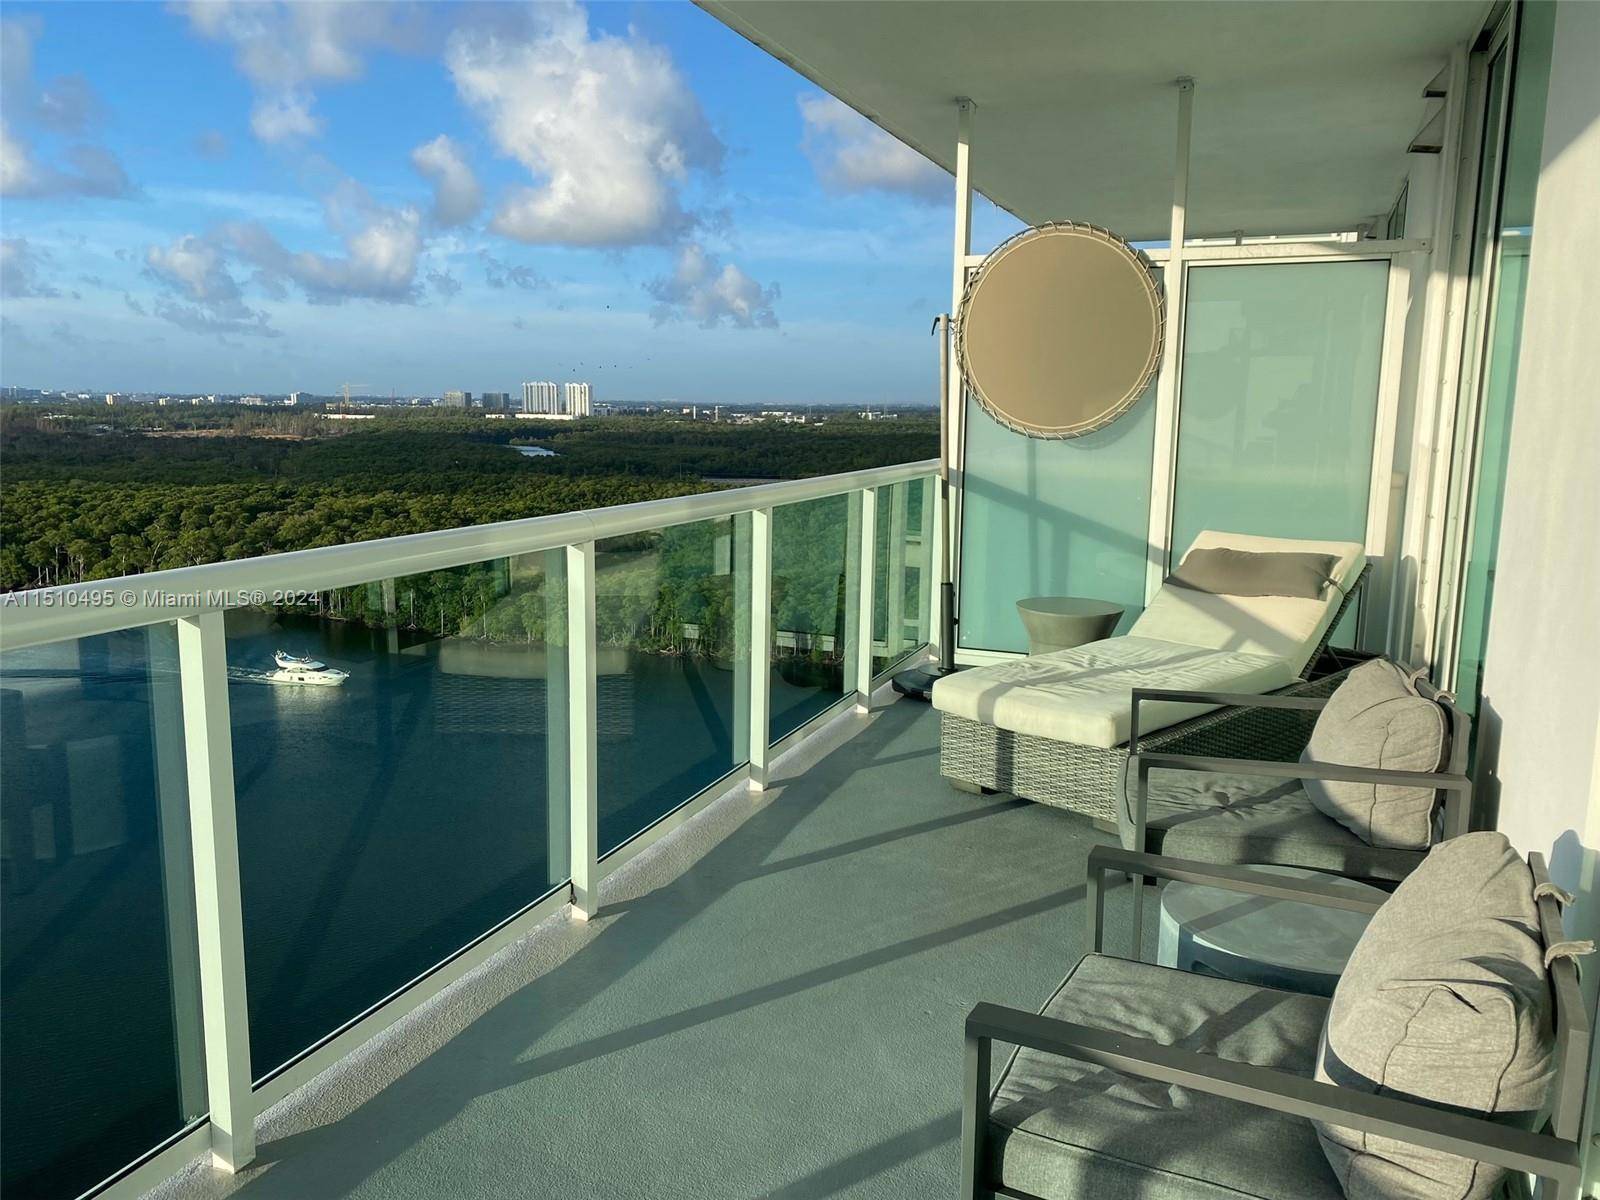 Experience waterfront luxury in this stunning 3 bedroom, 3 bathroom unit, offering awe inspiring views of the bay, ocean, and Oleta State Park.